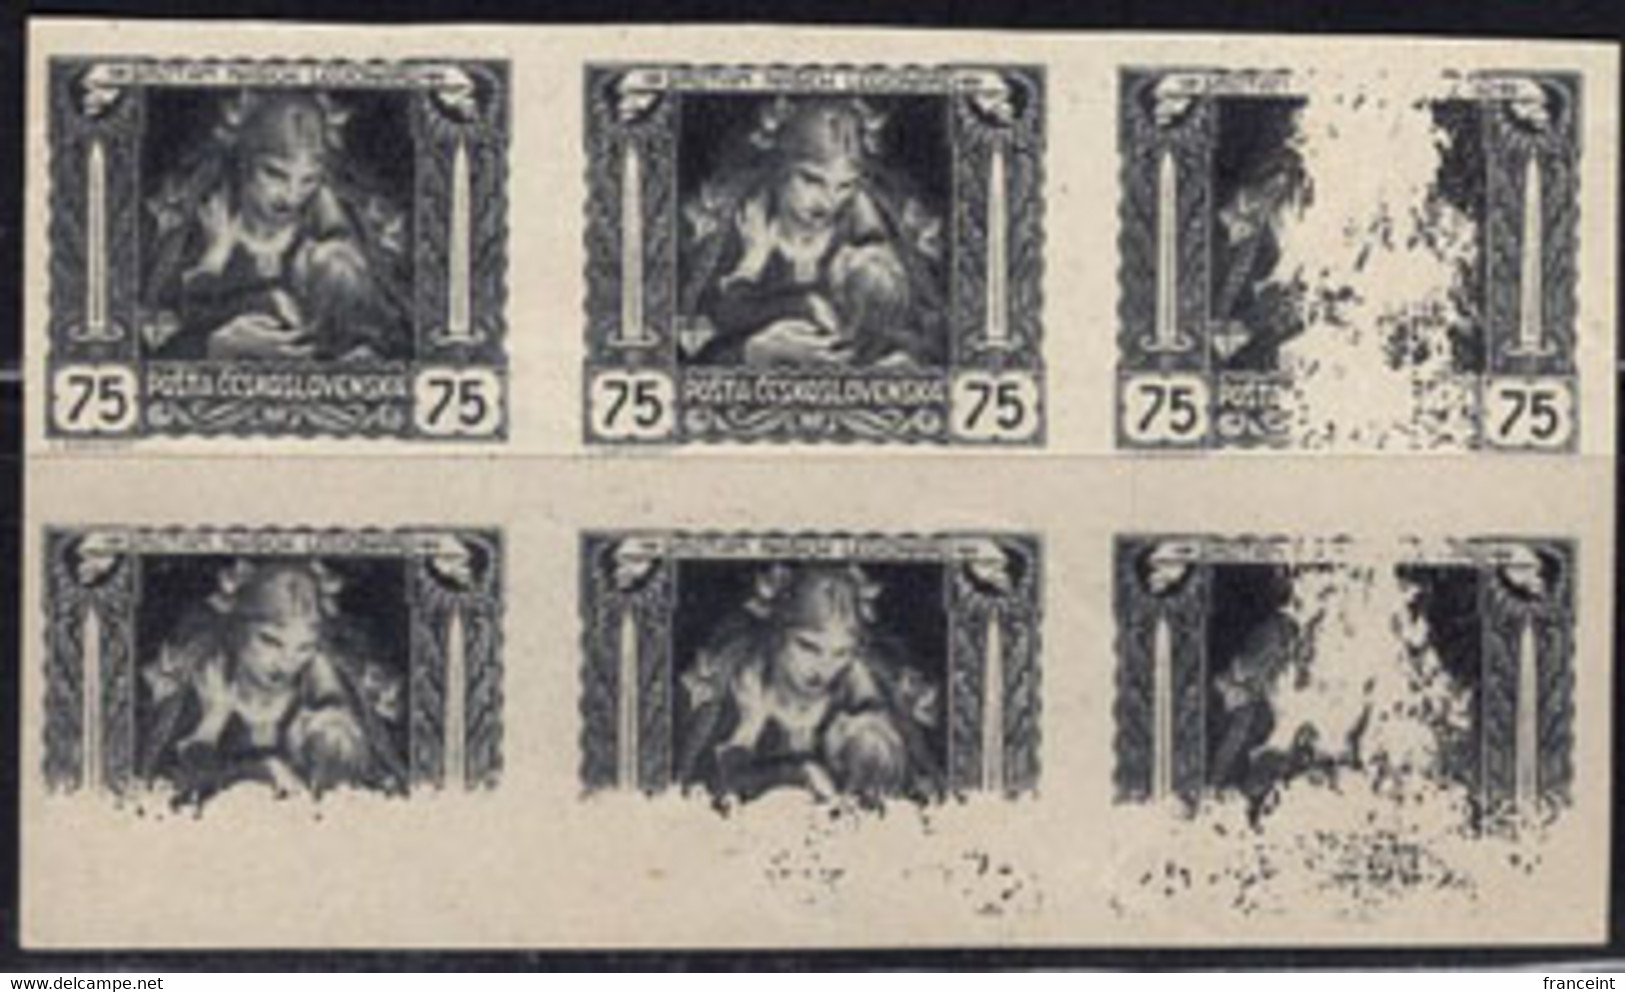 CZECHOSLOVAKIA(1919) Mother And Child. Block Of 6 Imperforate Proofs Printed On White Paper. Scott No B127. - Prove E Ristampe